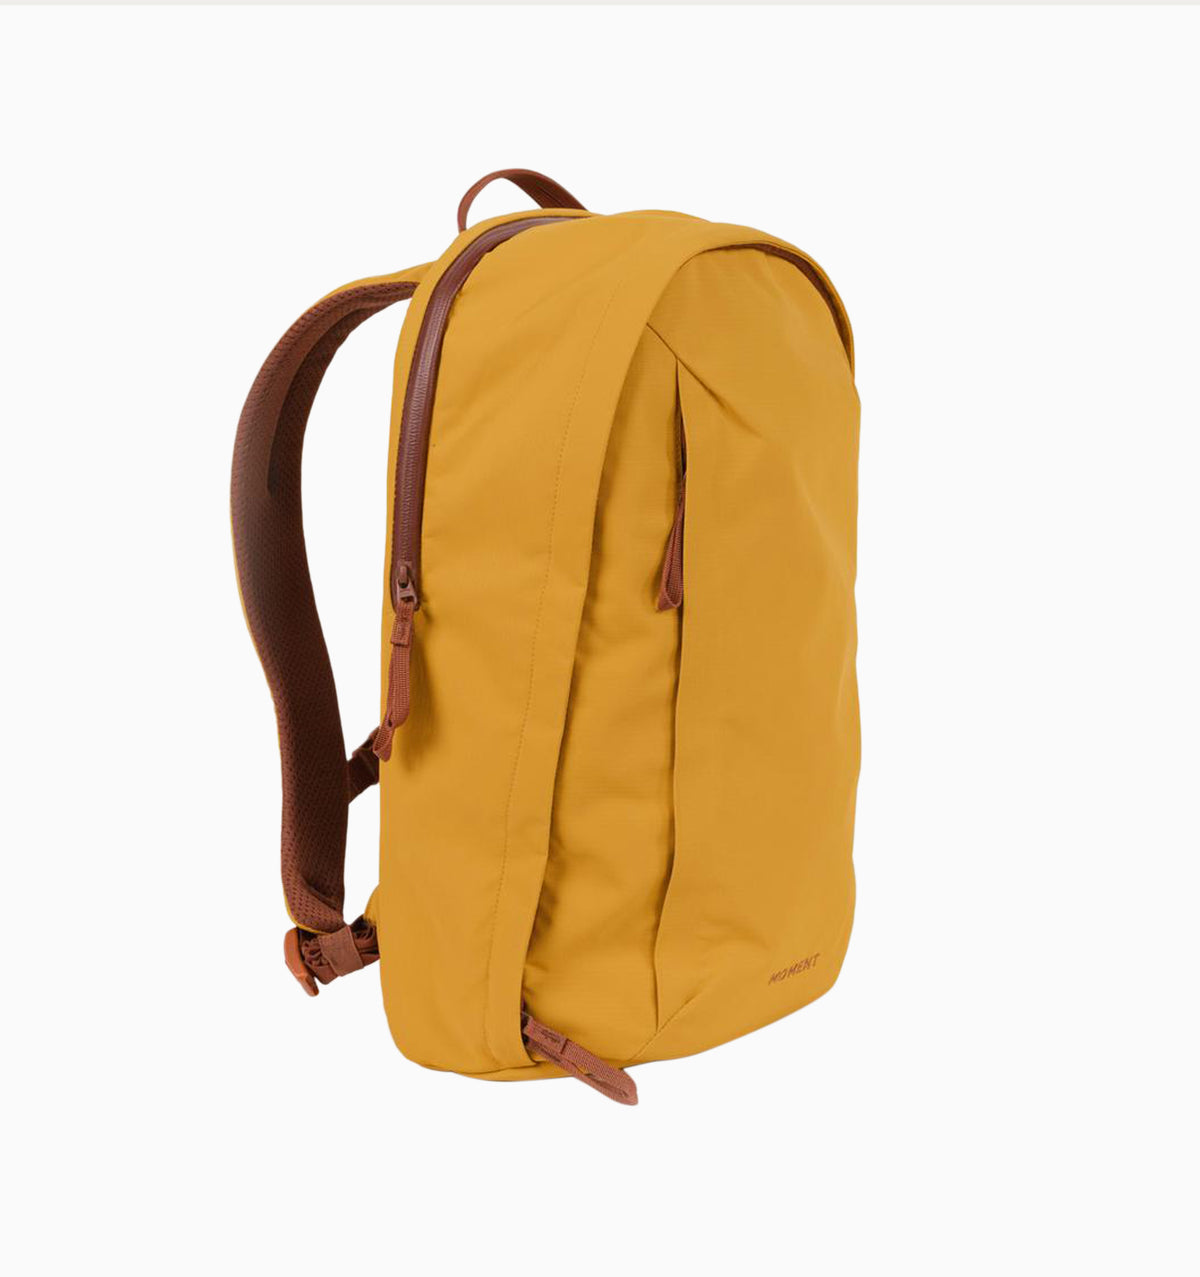 Moment 16" Everything Backpack 21L - Workwear